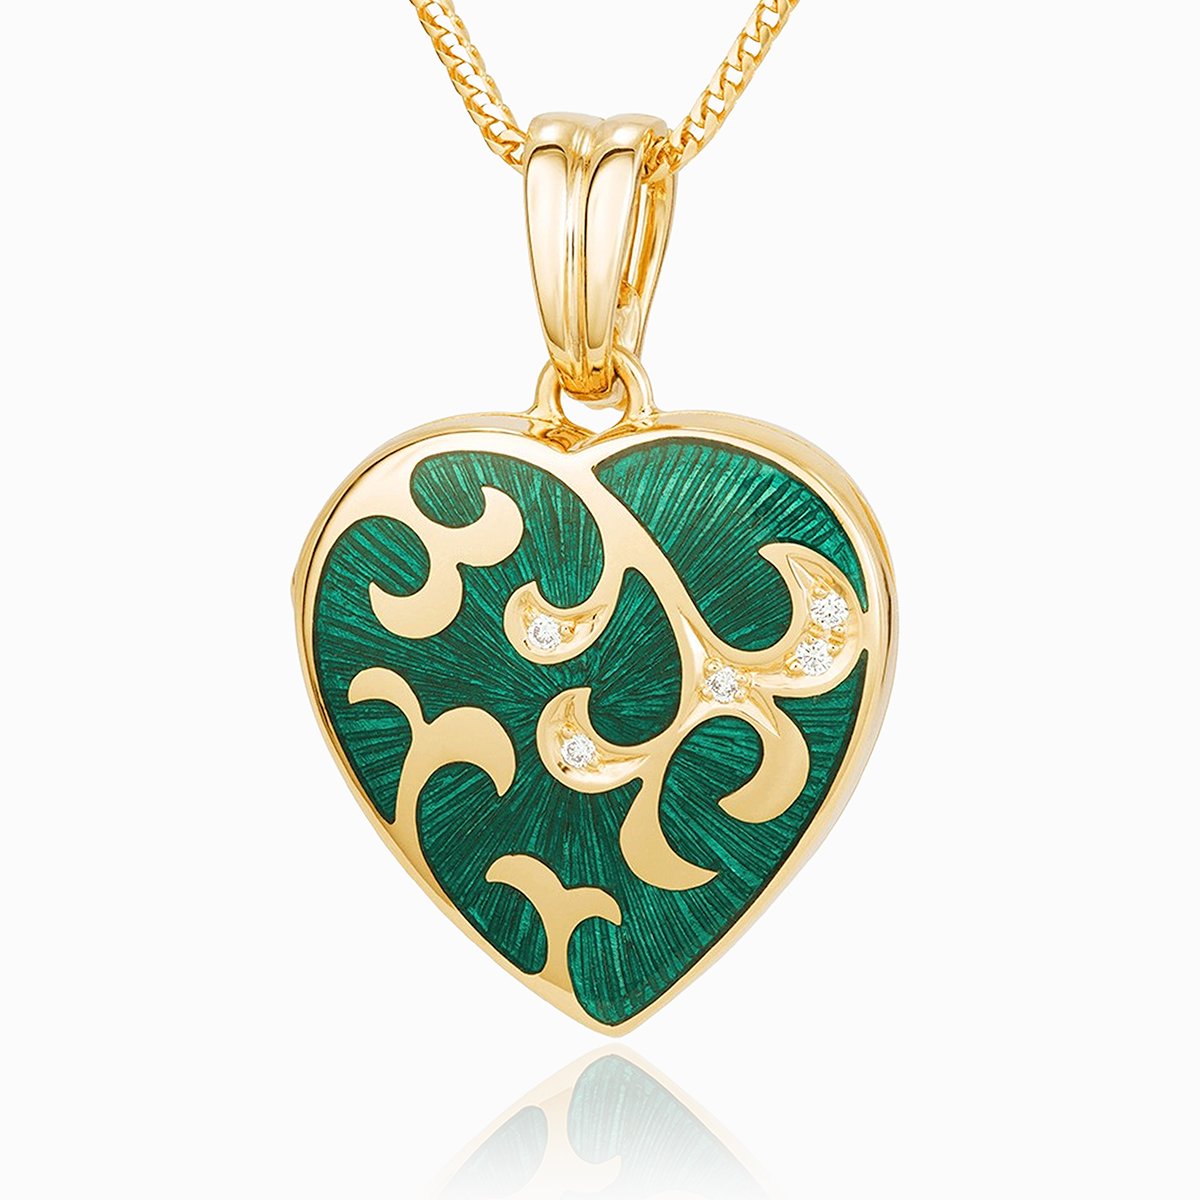 18 ct gold heart locket set with green guilloche enamel and diamonds in a floral design on an 18 ct gold franco chain